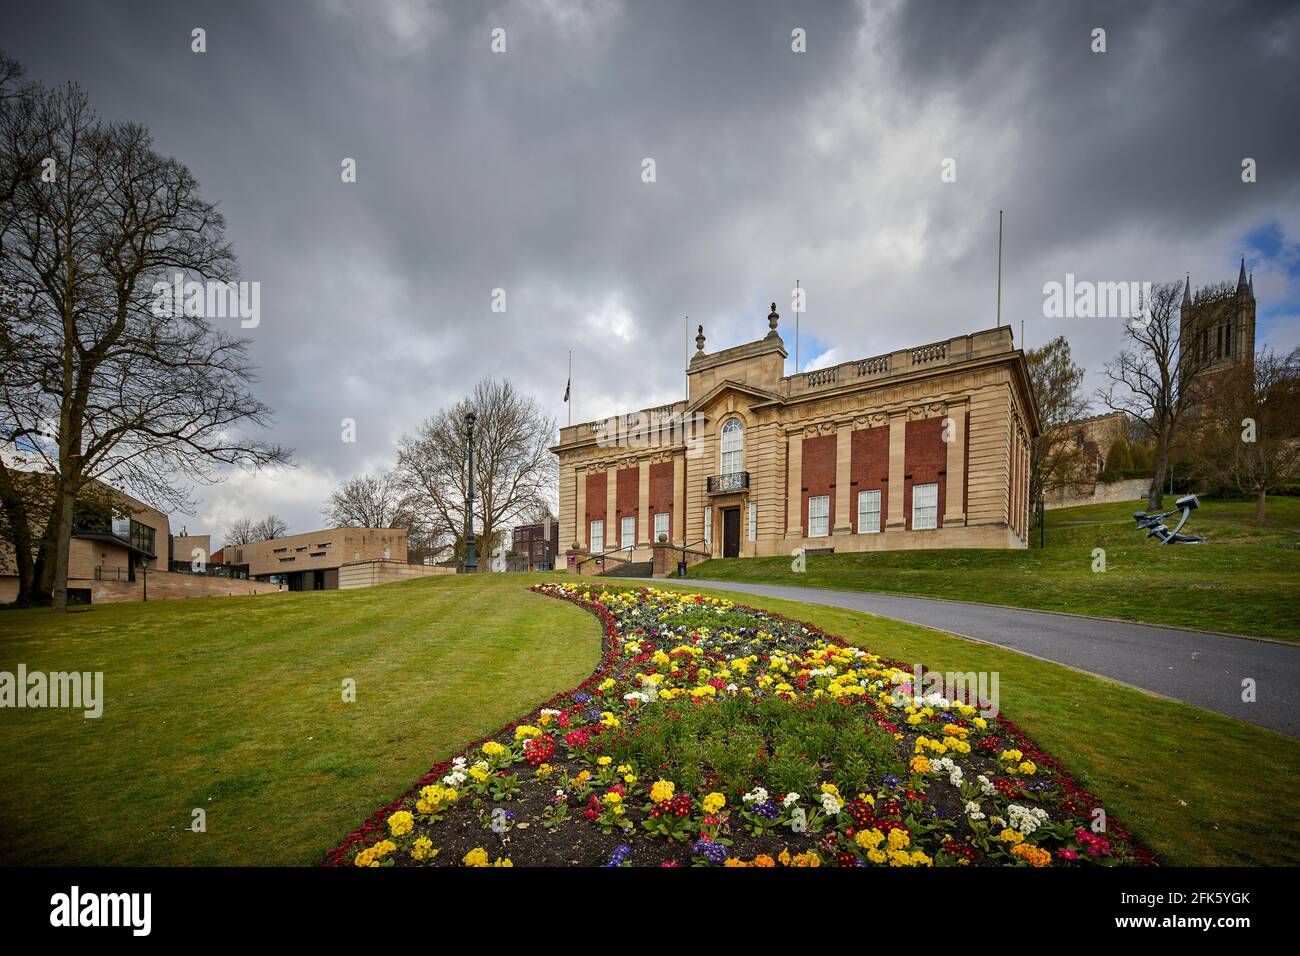 Lincoln, Lincolnshire, East Midlands, Terrace Gardens, Usher Gallery, Banque D'Images